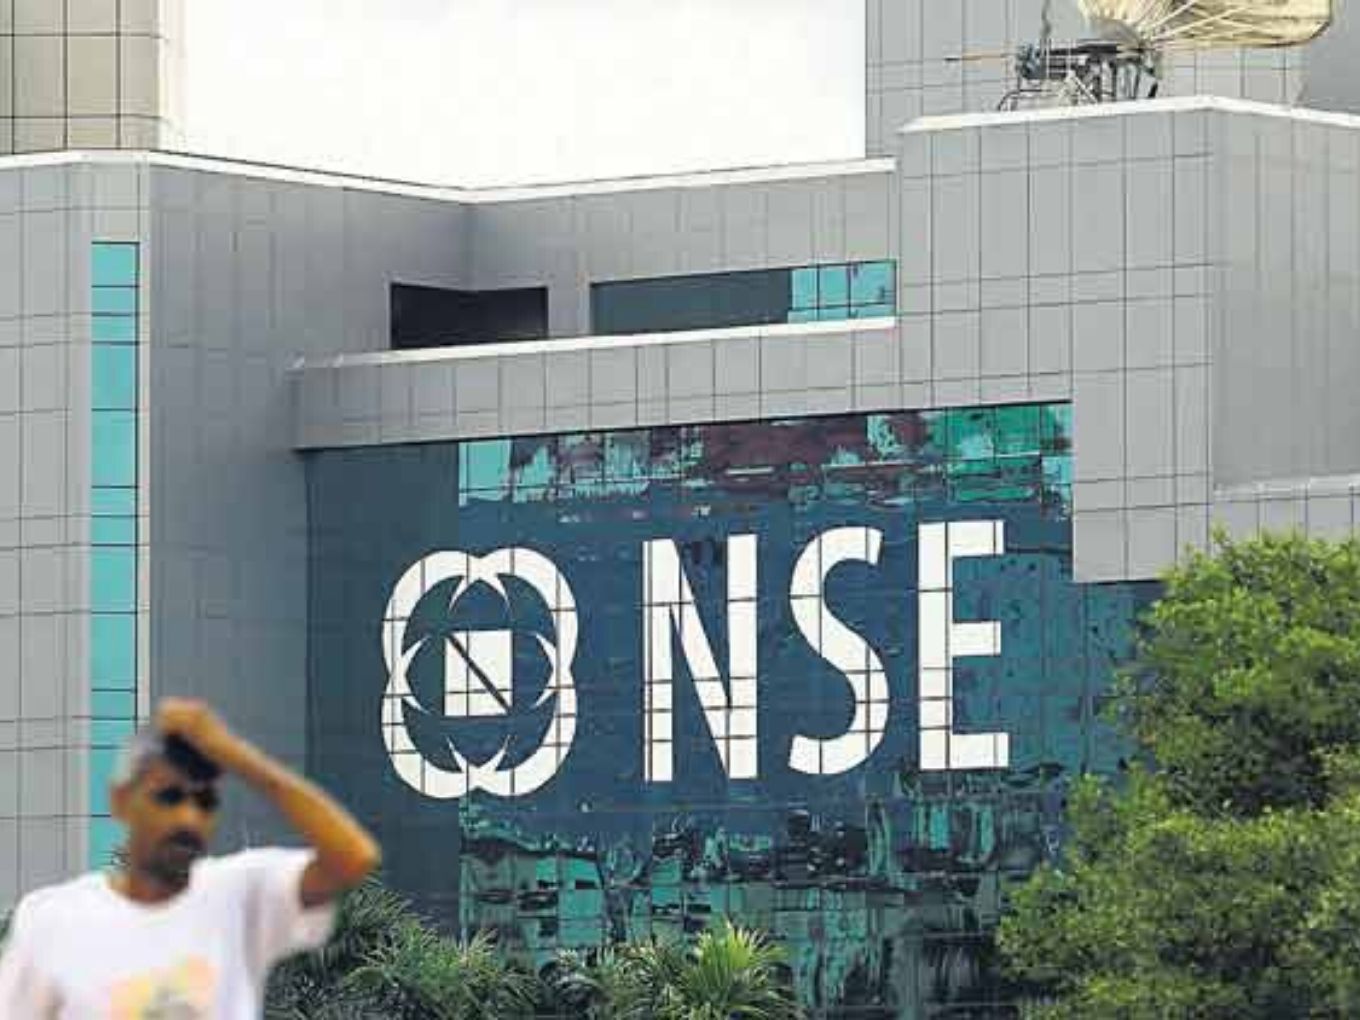 SEBI Sends Show-Cause Notice To NSE Over Corporate Governance